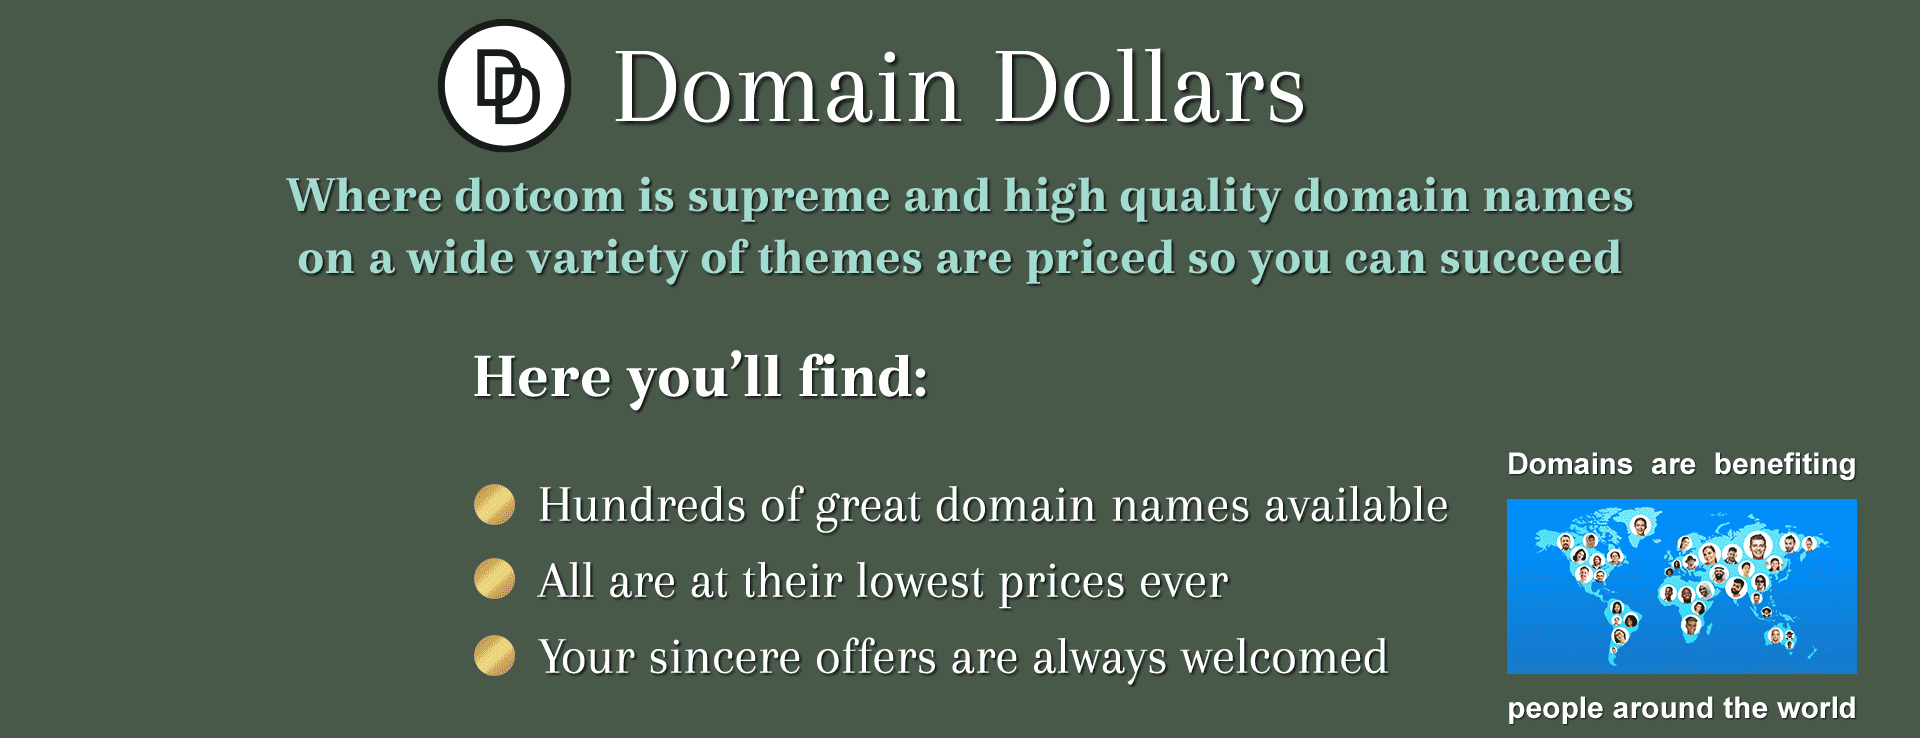 Domain Dollars - Own any domain for your accepted offer